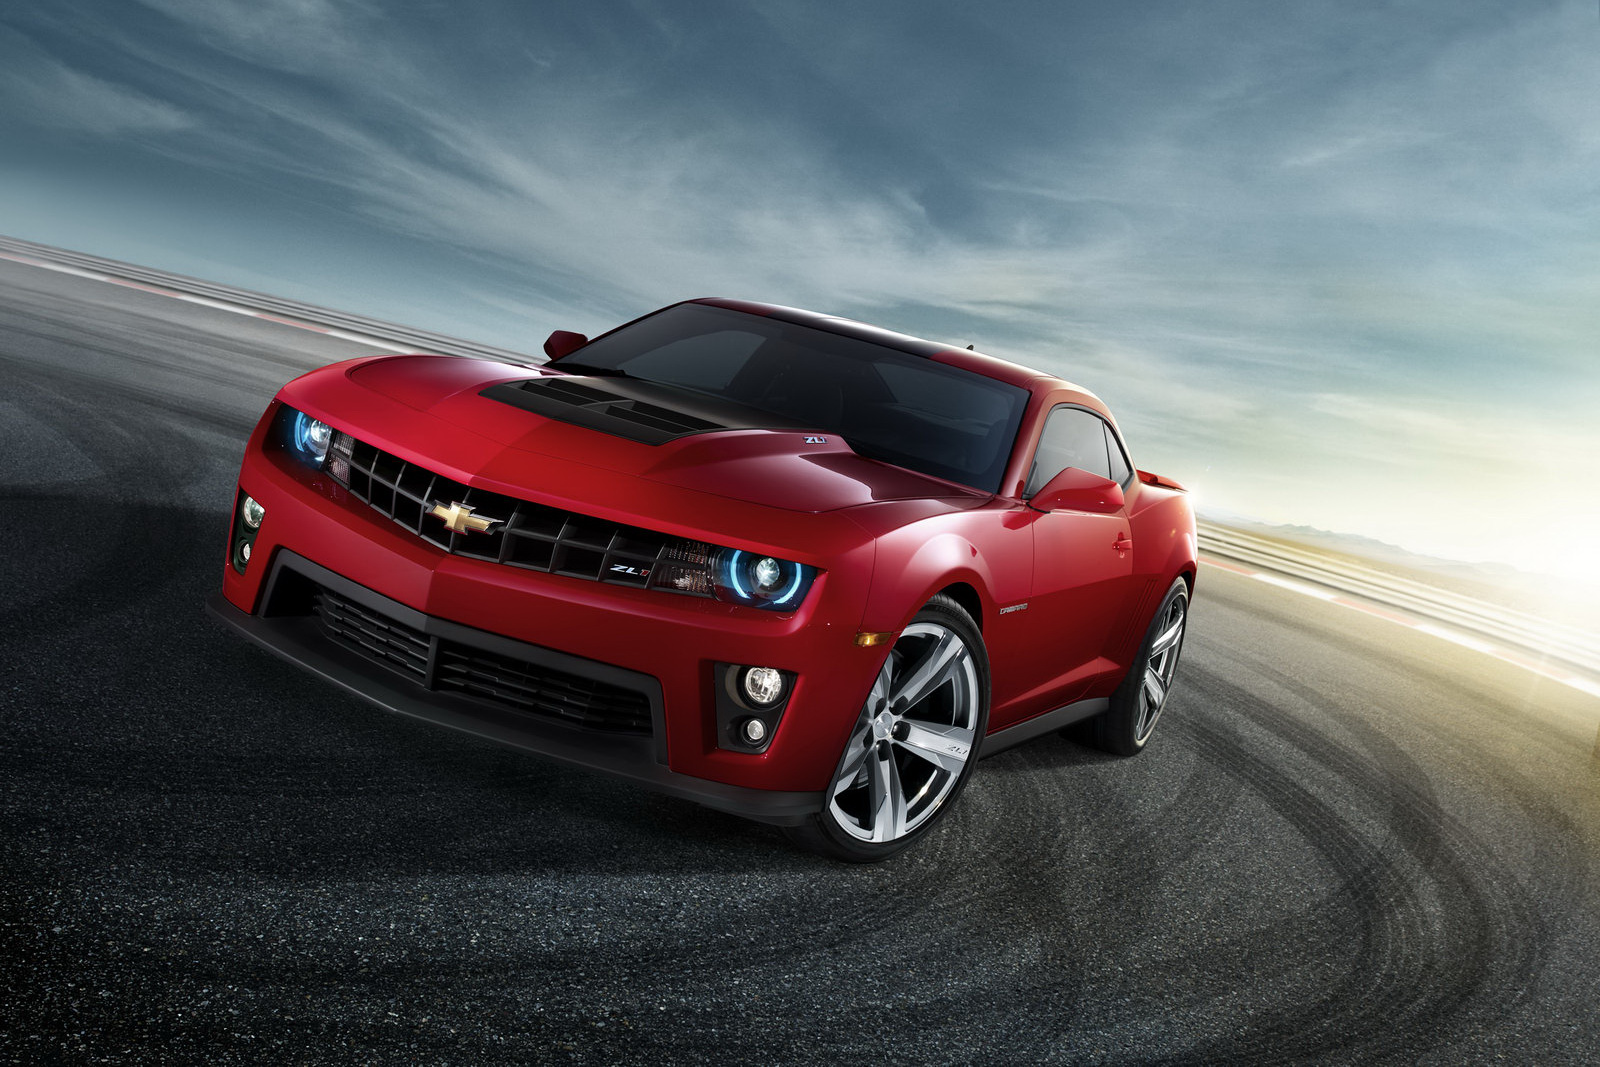 Chevy Rolls Out Bad Boy 2012 Camaro ZL1 with 550HP Supercharged V8 |  Carscoops